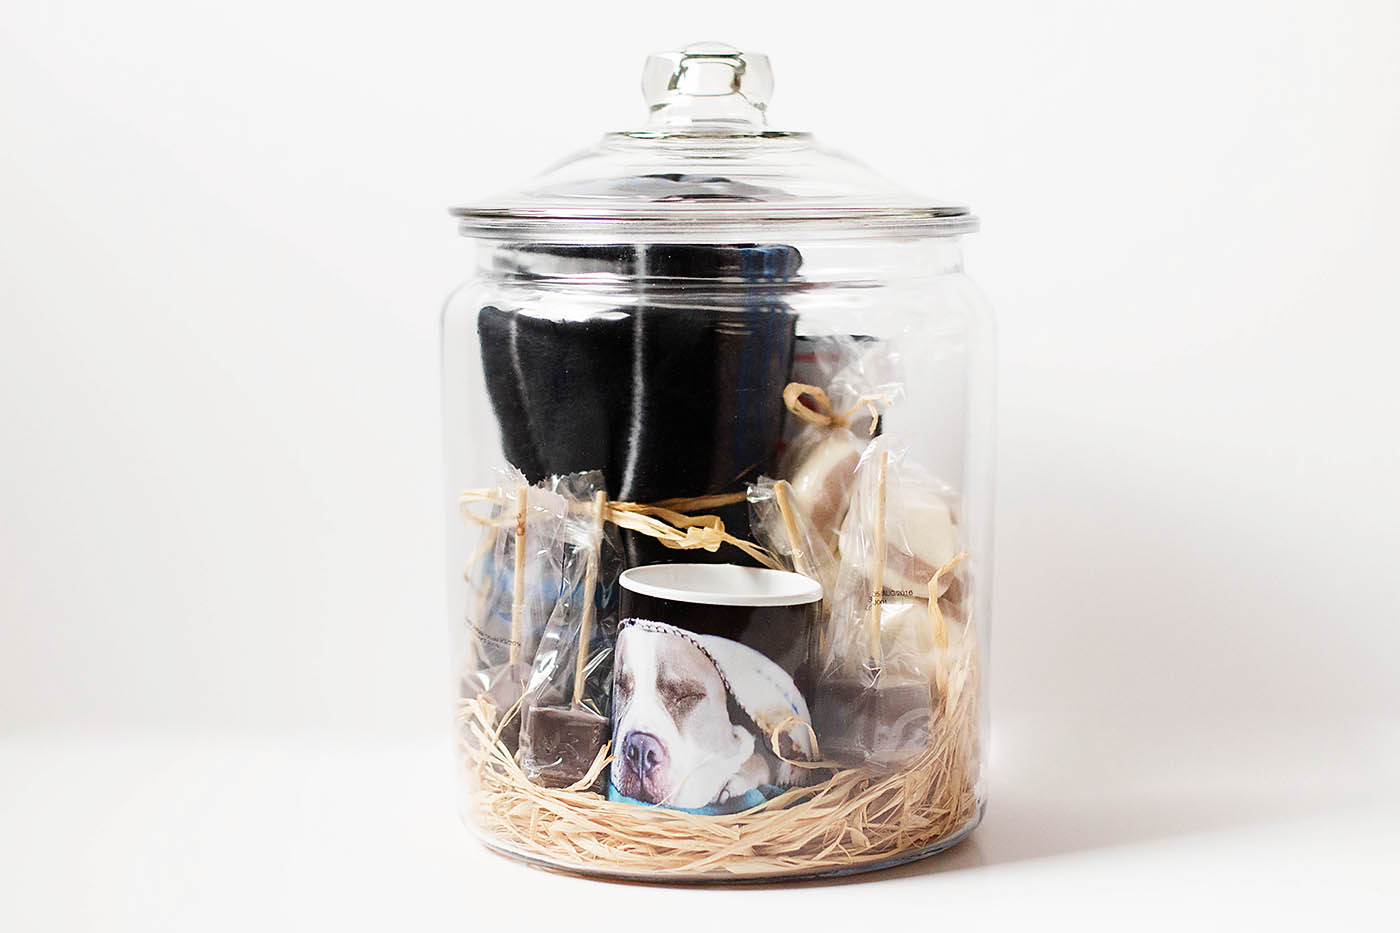 Gifts of experience are an awesome choice but we love wrapping gifts too! This fun personalized gift jar lets you give a cozy movie night all wrapped up in a jar!